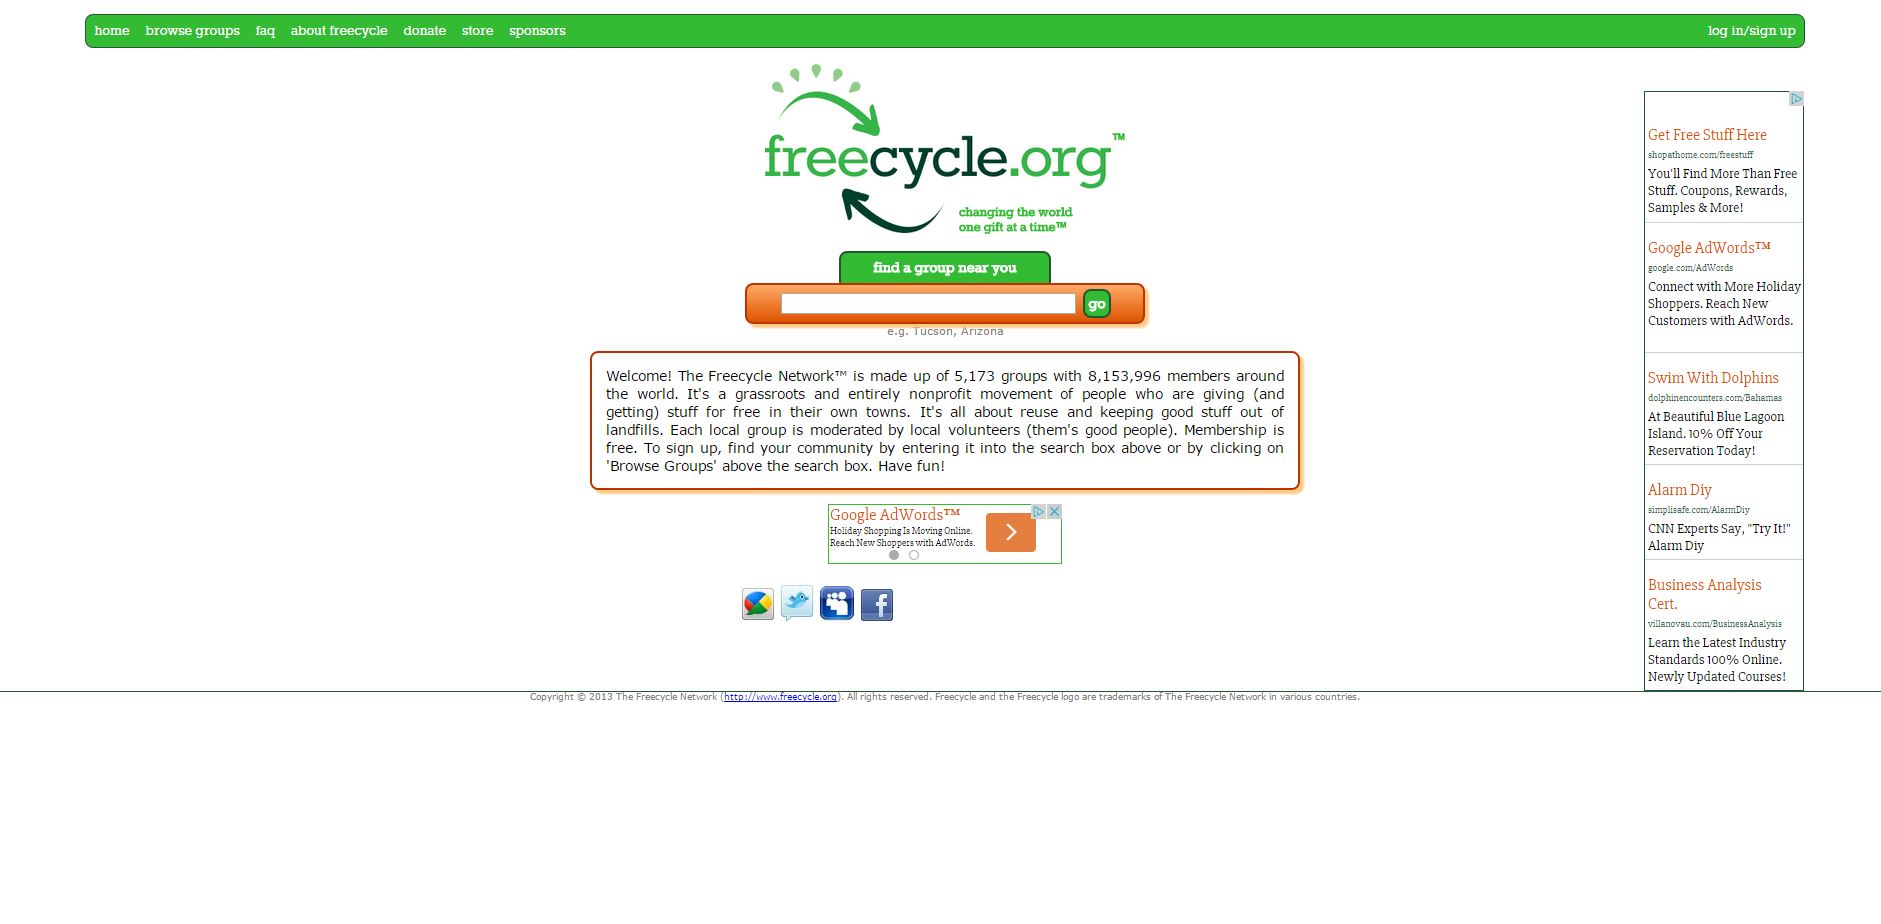 <a href="https://www.freecycle.org/" target="_blank">freecycle.org</a> - The Freecycle Network is made up of 5,173 groups with 8,153,996 members around the world who keep landfills less full by giving and getting each other's stuff for free. It's like Craigslist, only completely free. Browse through the groups to see if there is anything you could use or want.